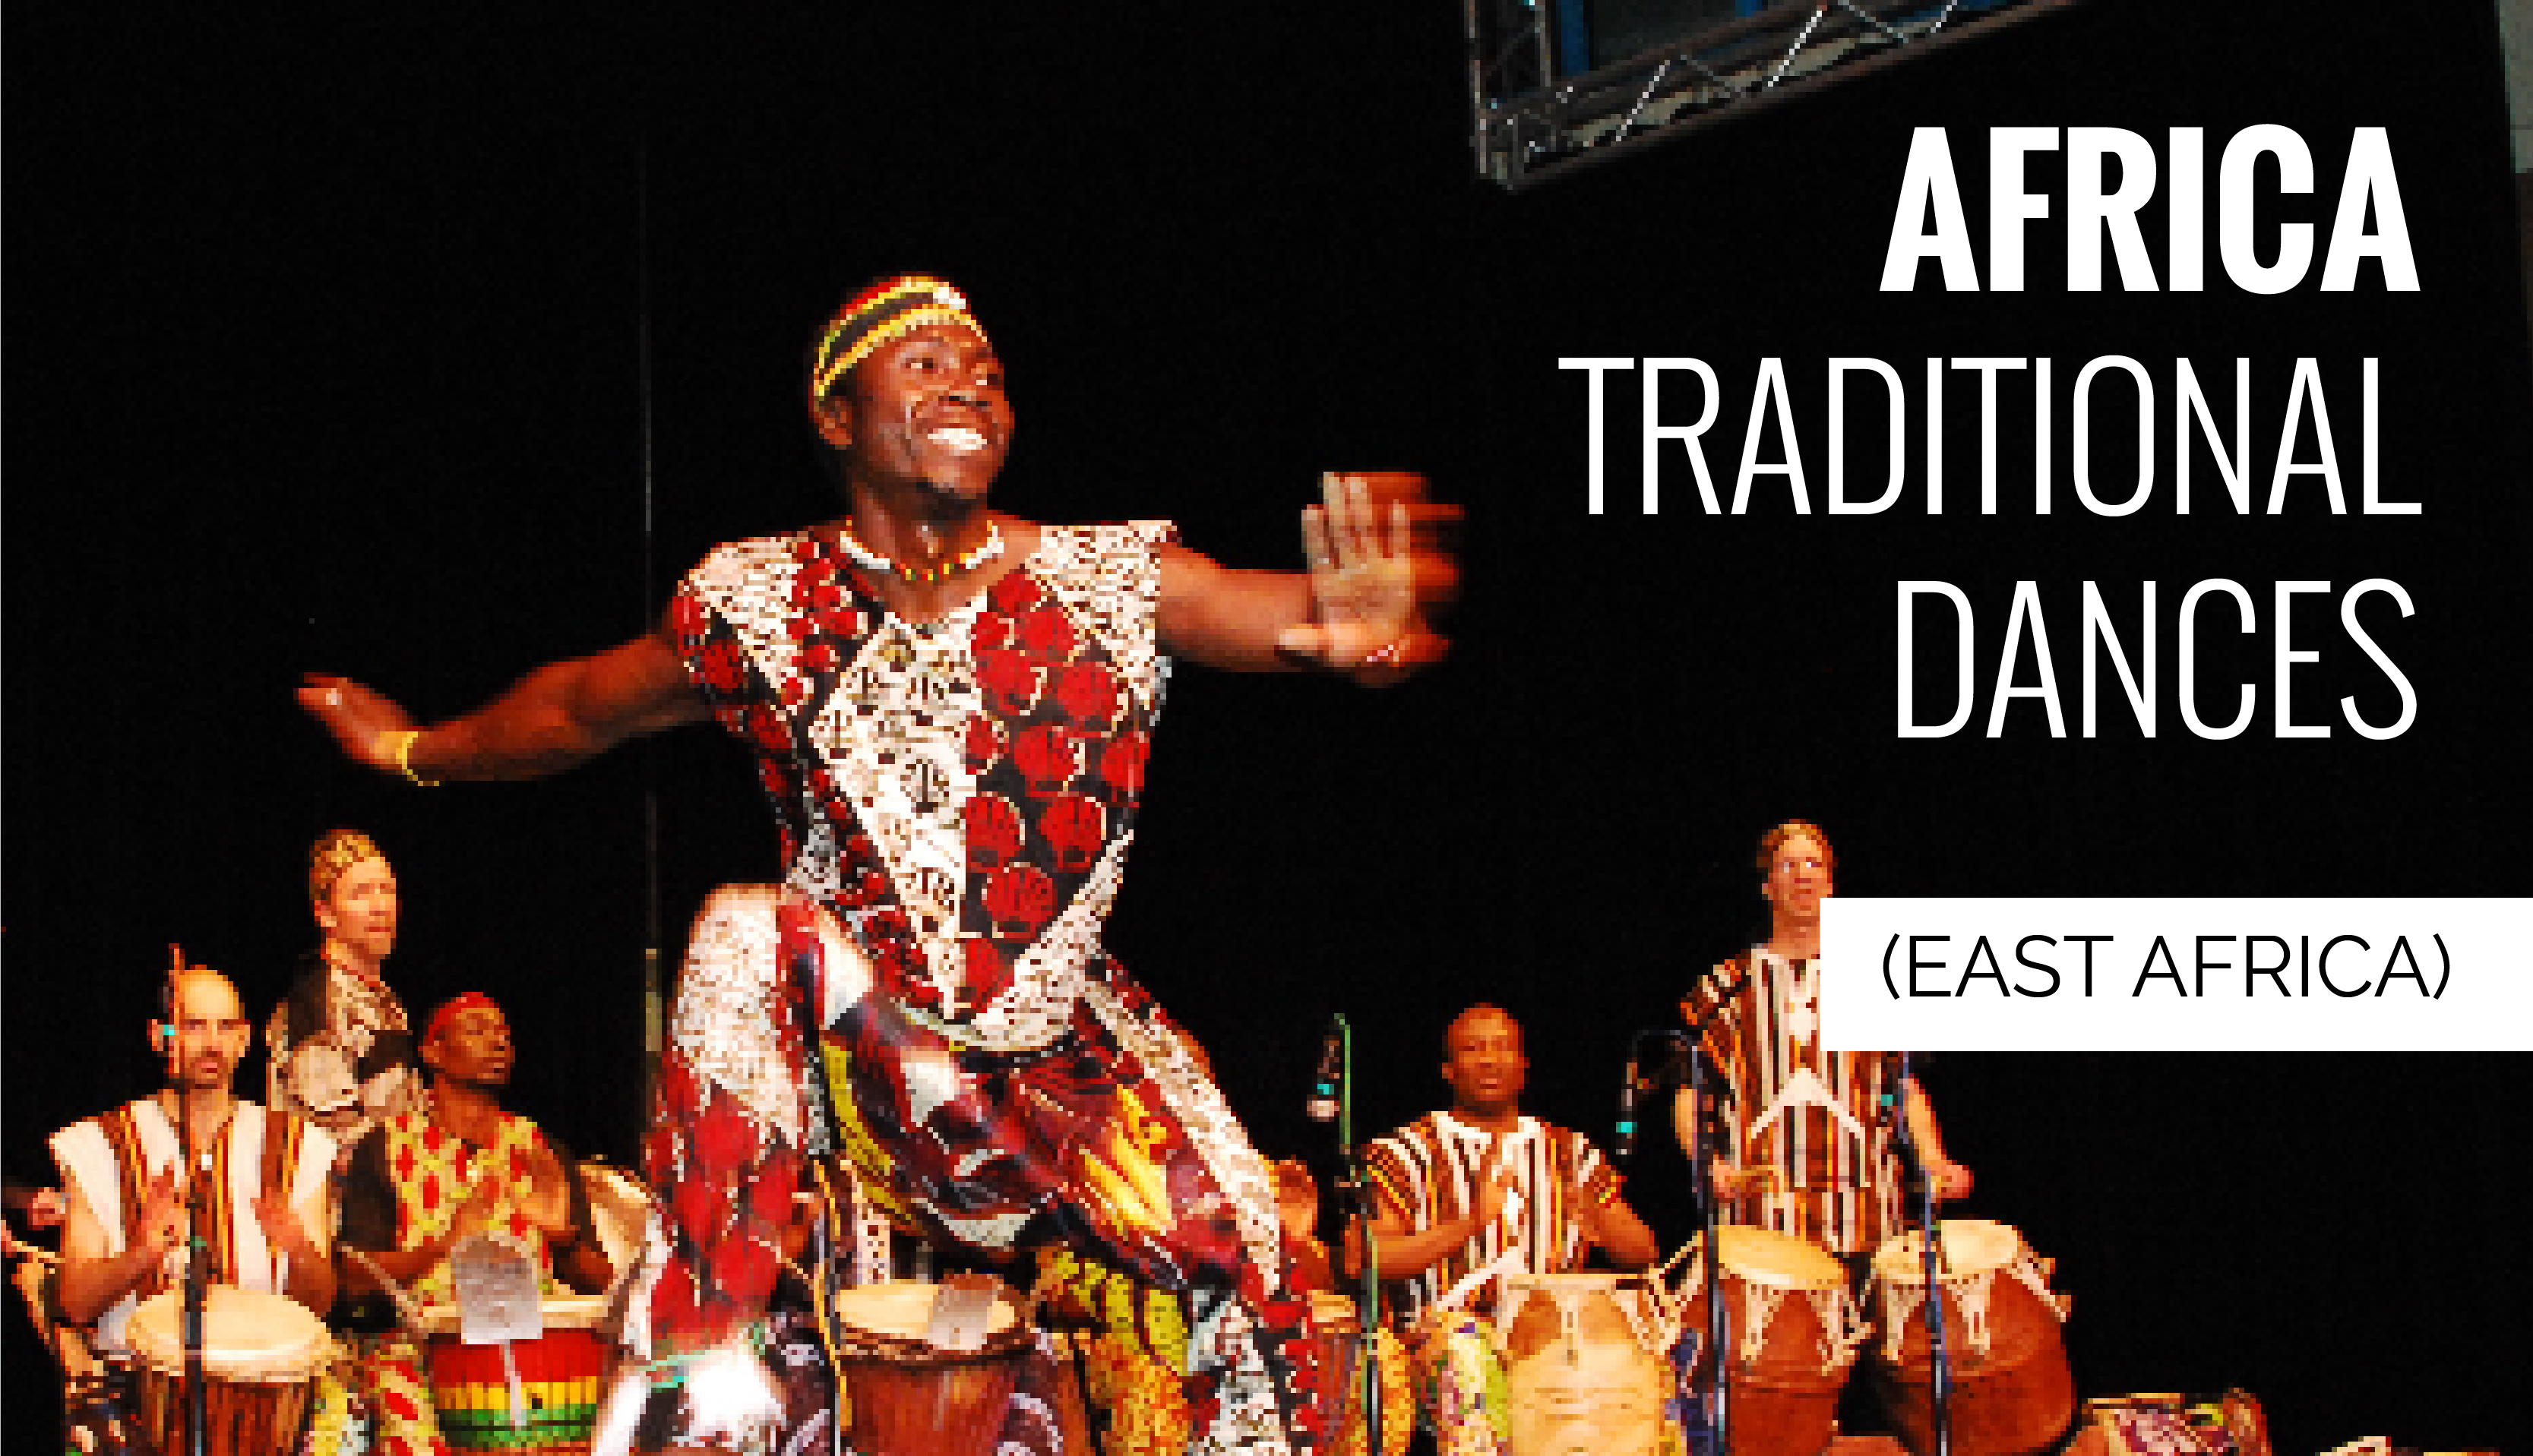 East Africa Traditional Dances